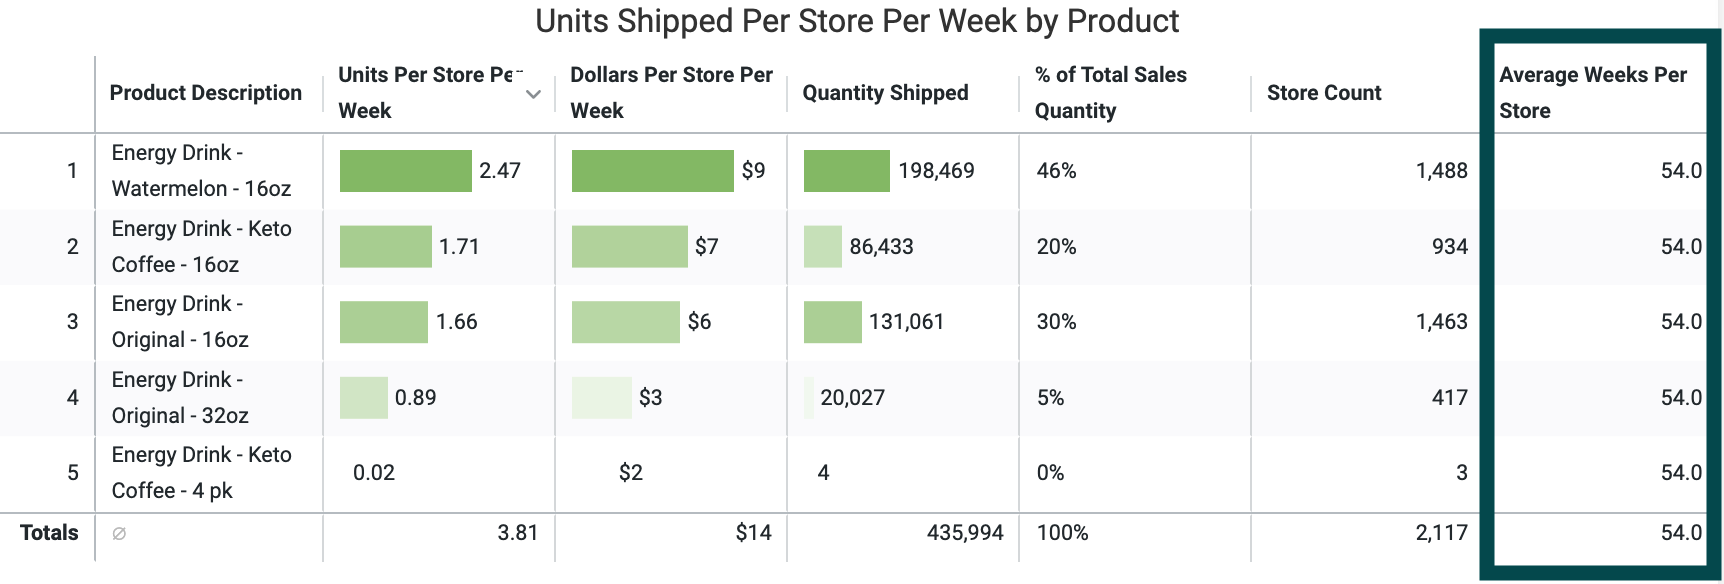 Units_Shipped_Per_Store_Per_Week_by_Product_Including_Zero_Sales_Weeks.png